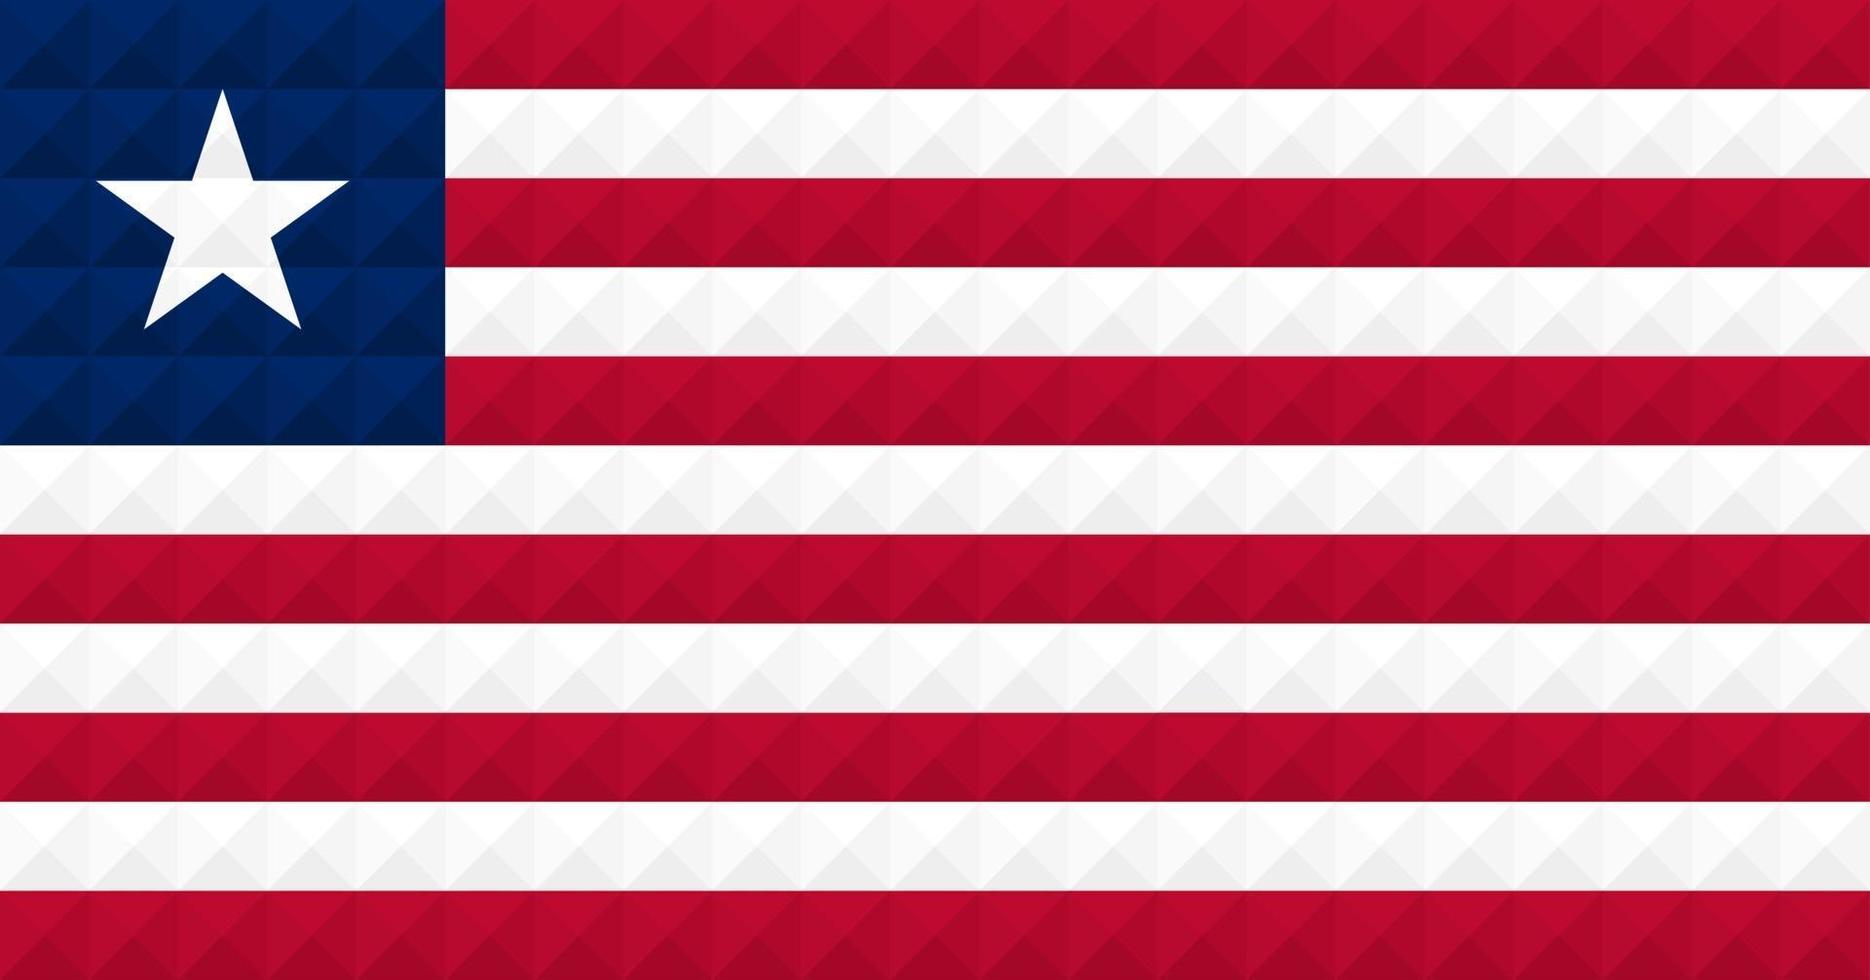 Artistic flag of Liberia with geometric wave concept art design vector